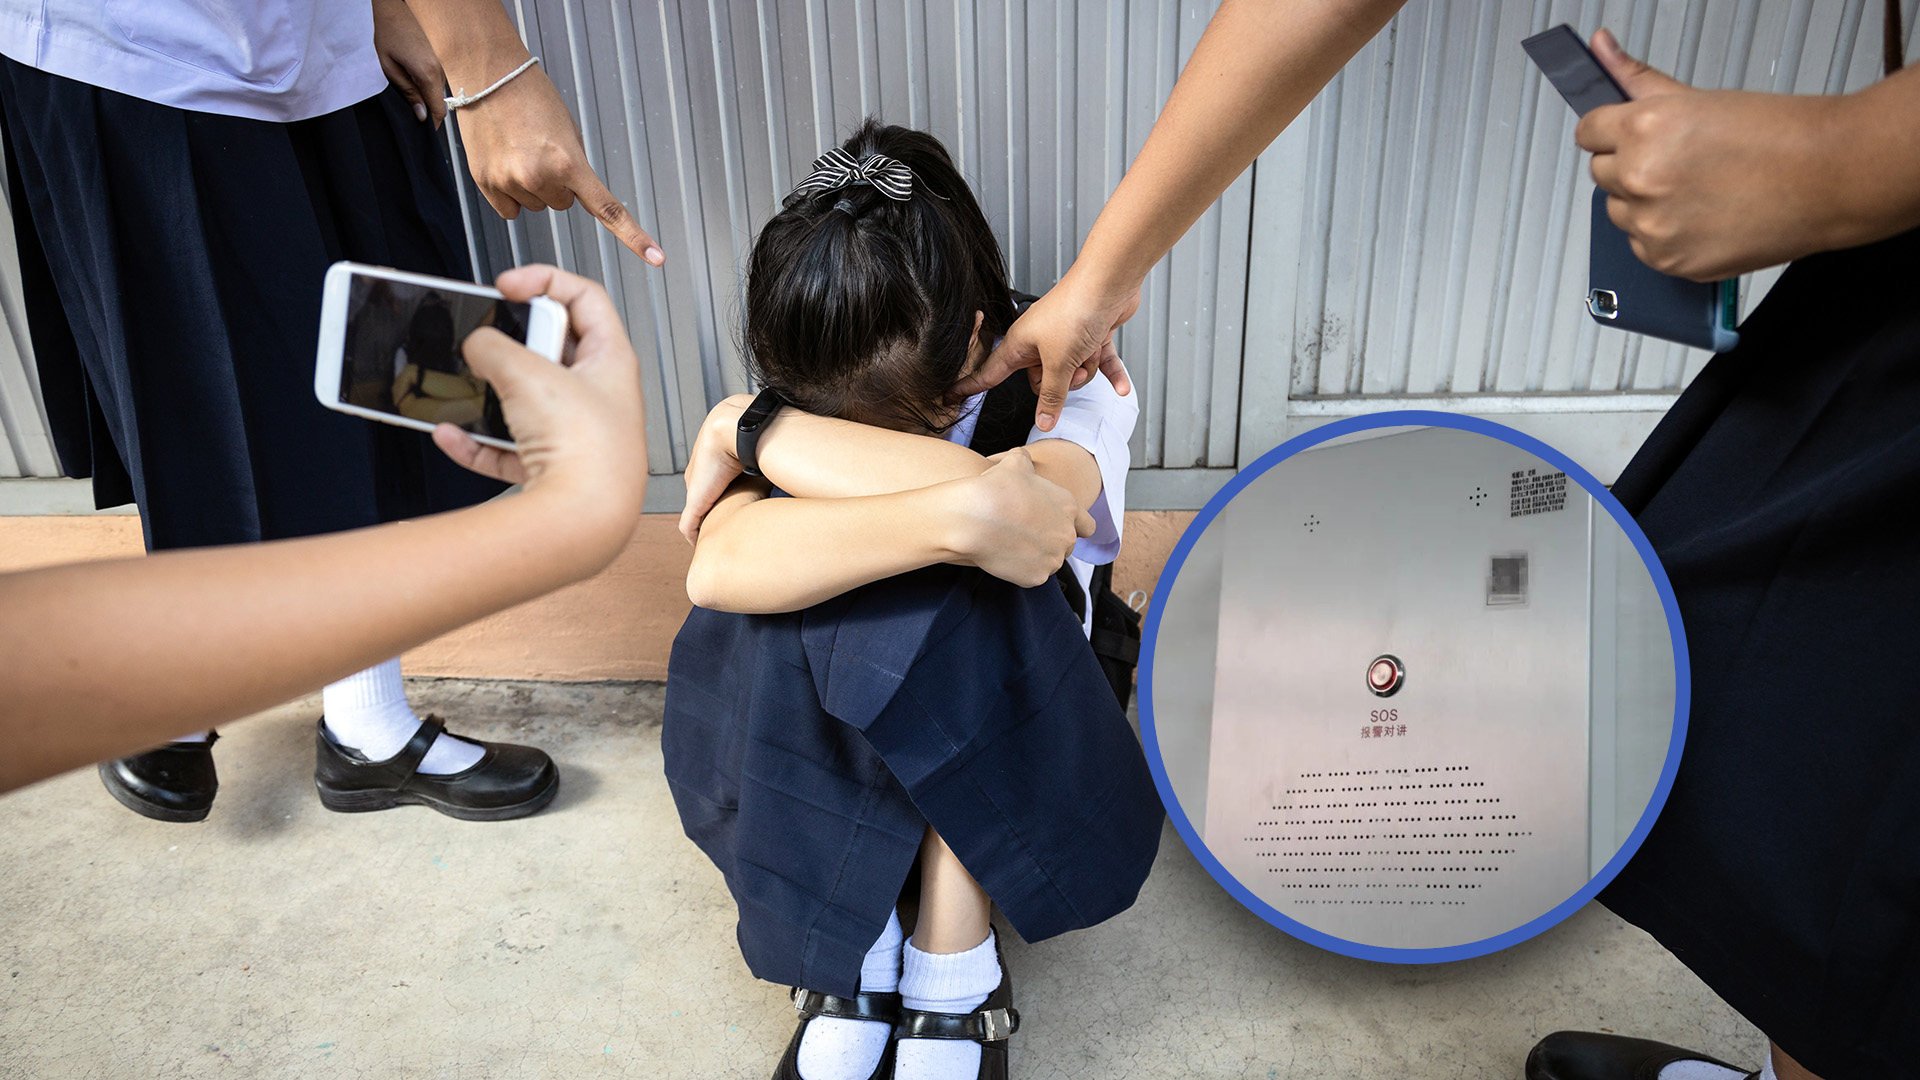 A school in China has installed alarms in its toilets in a bid to tackle the persistent problem of bullying on campus. Photo: SCMP composite/Shutterstock/cqnews
